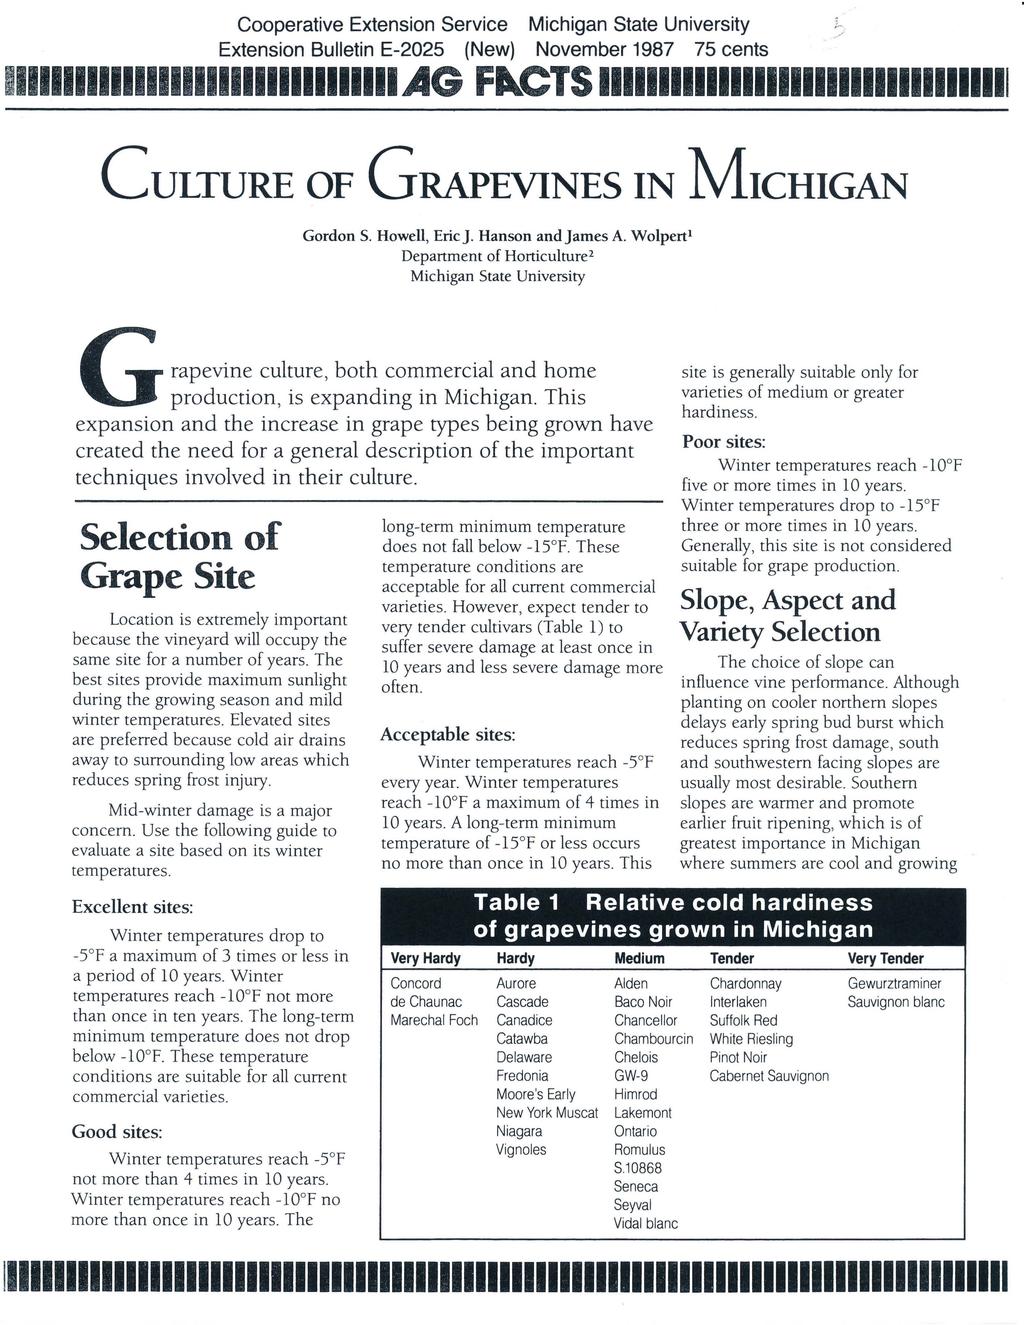 Cooperative Extension Service Michigan State University Extension Bulletin E-2025 (New) November 1987 75 cents 11111111111111111111111111111111 AG F~CTS 11111111111111111111111111111111111 CULTURE OF